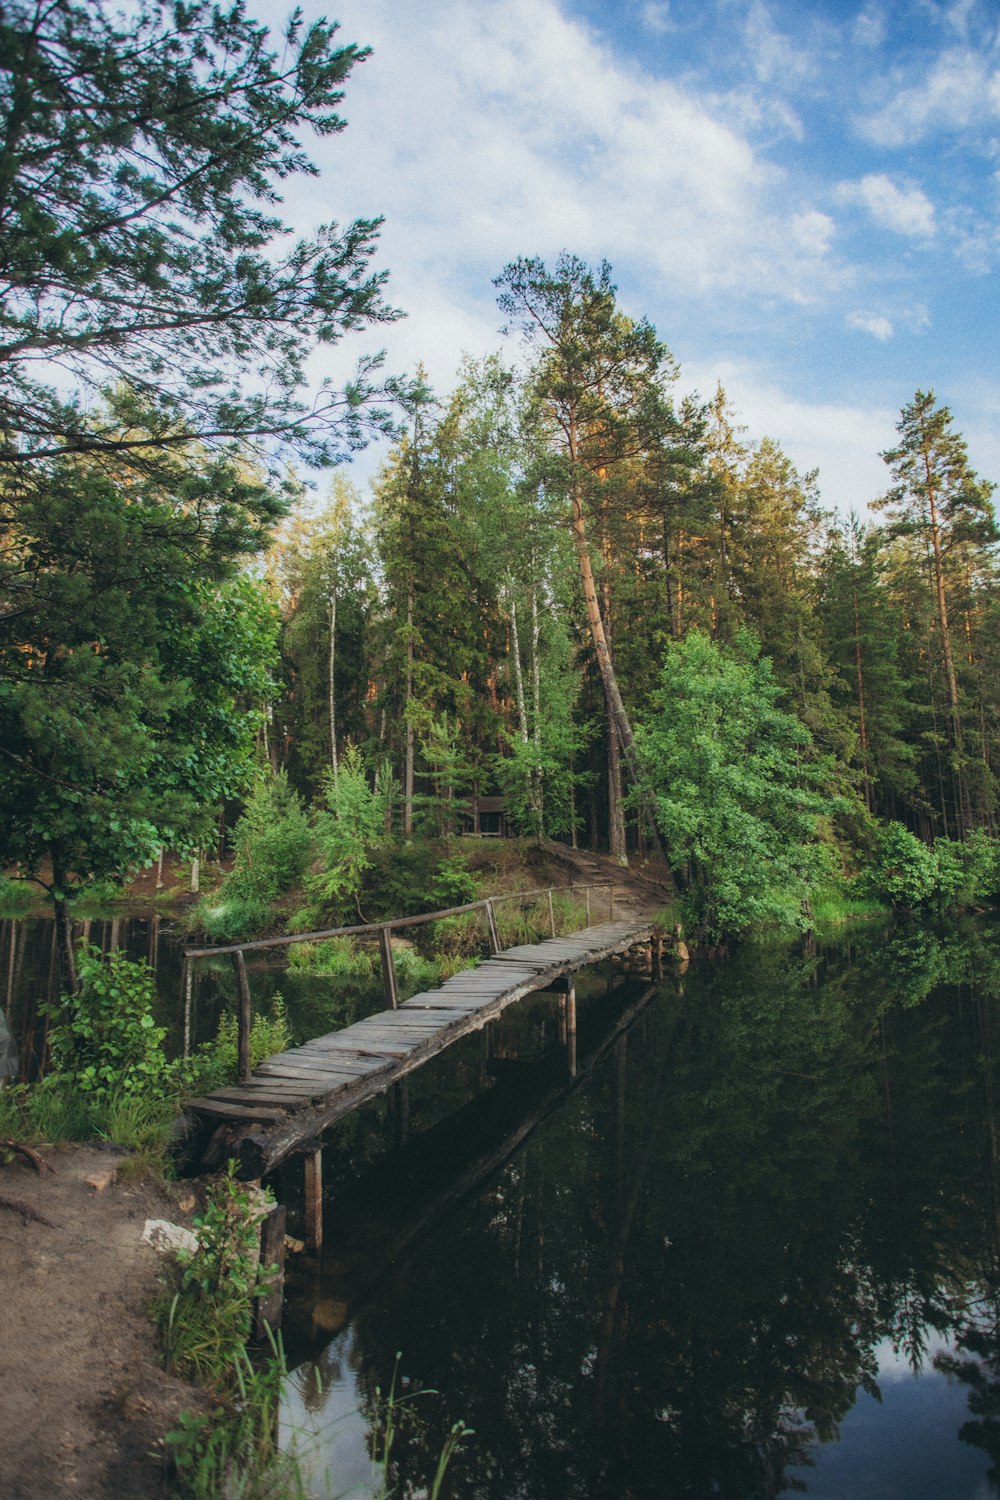 a wooden dock in the middle of a forest